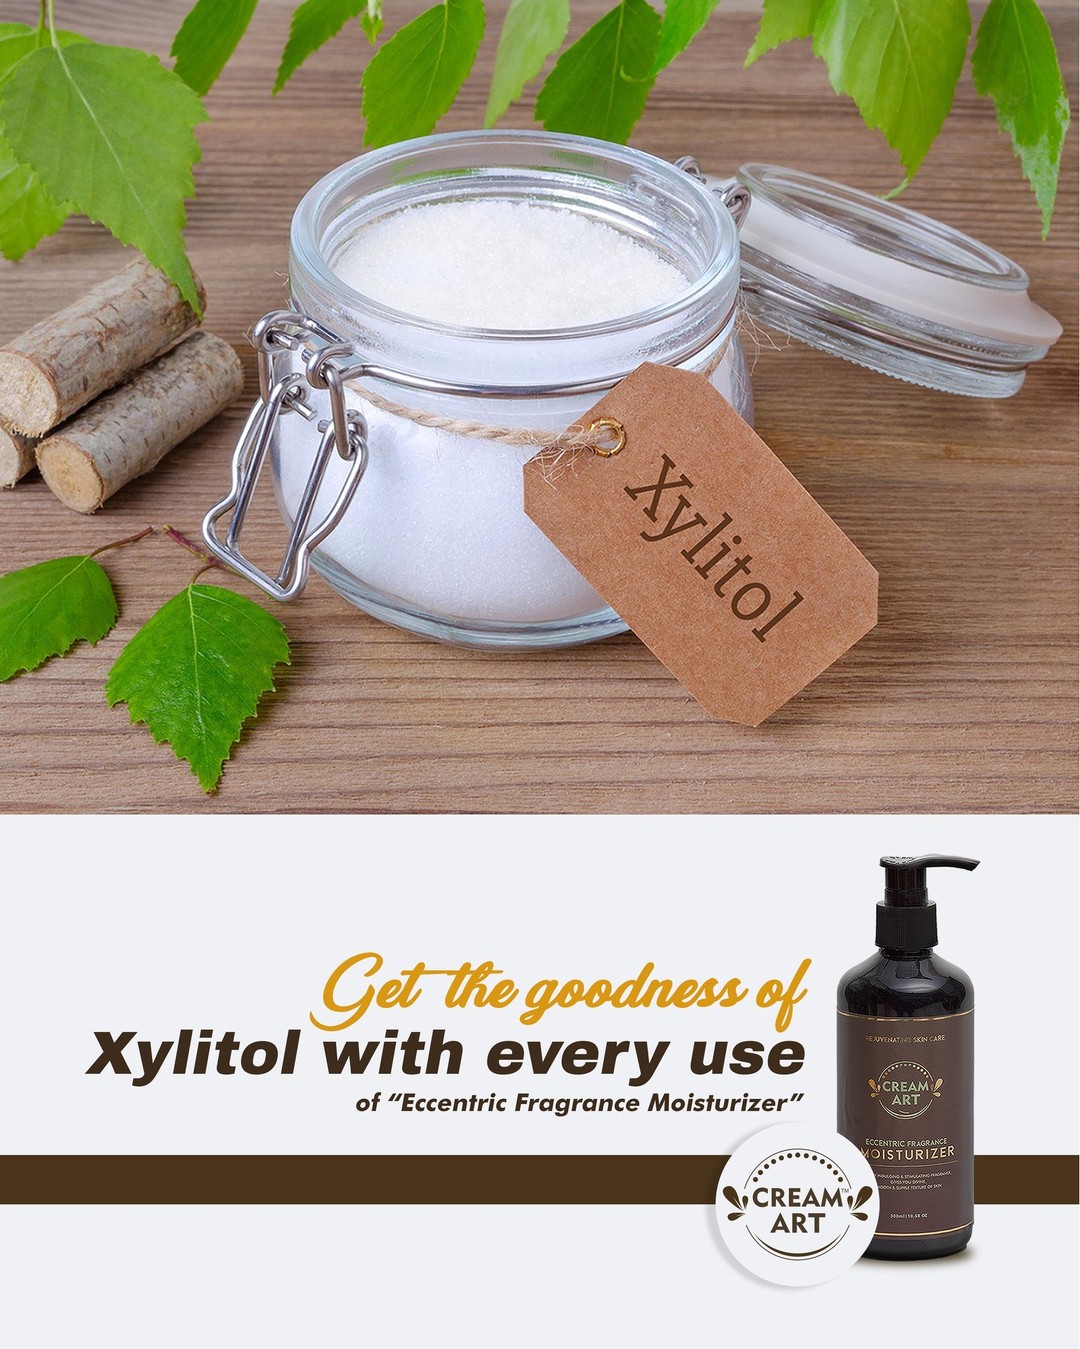 Xylitol Is A Fruit And Plant Extract That Is Ideal Ingredient For Moisturized Skin. Want The Best Of This Nutrient For Your Skin. Buy The All-Natural Luxurious Creamart Moisturizer With Eccentric Fragrance Now!!For More Details Visit: https://creamart.co.in/#xylitol #moisturizer #hydratedskin #skincareroutine #skincareproduct #luxuryproduct #creamart